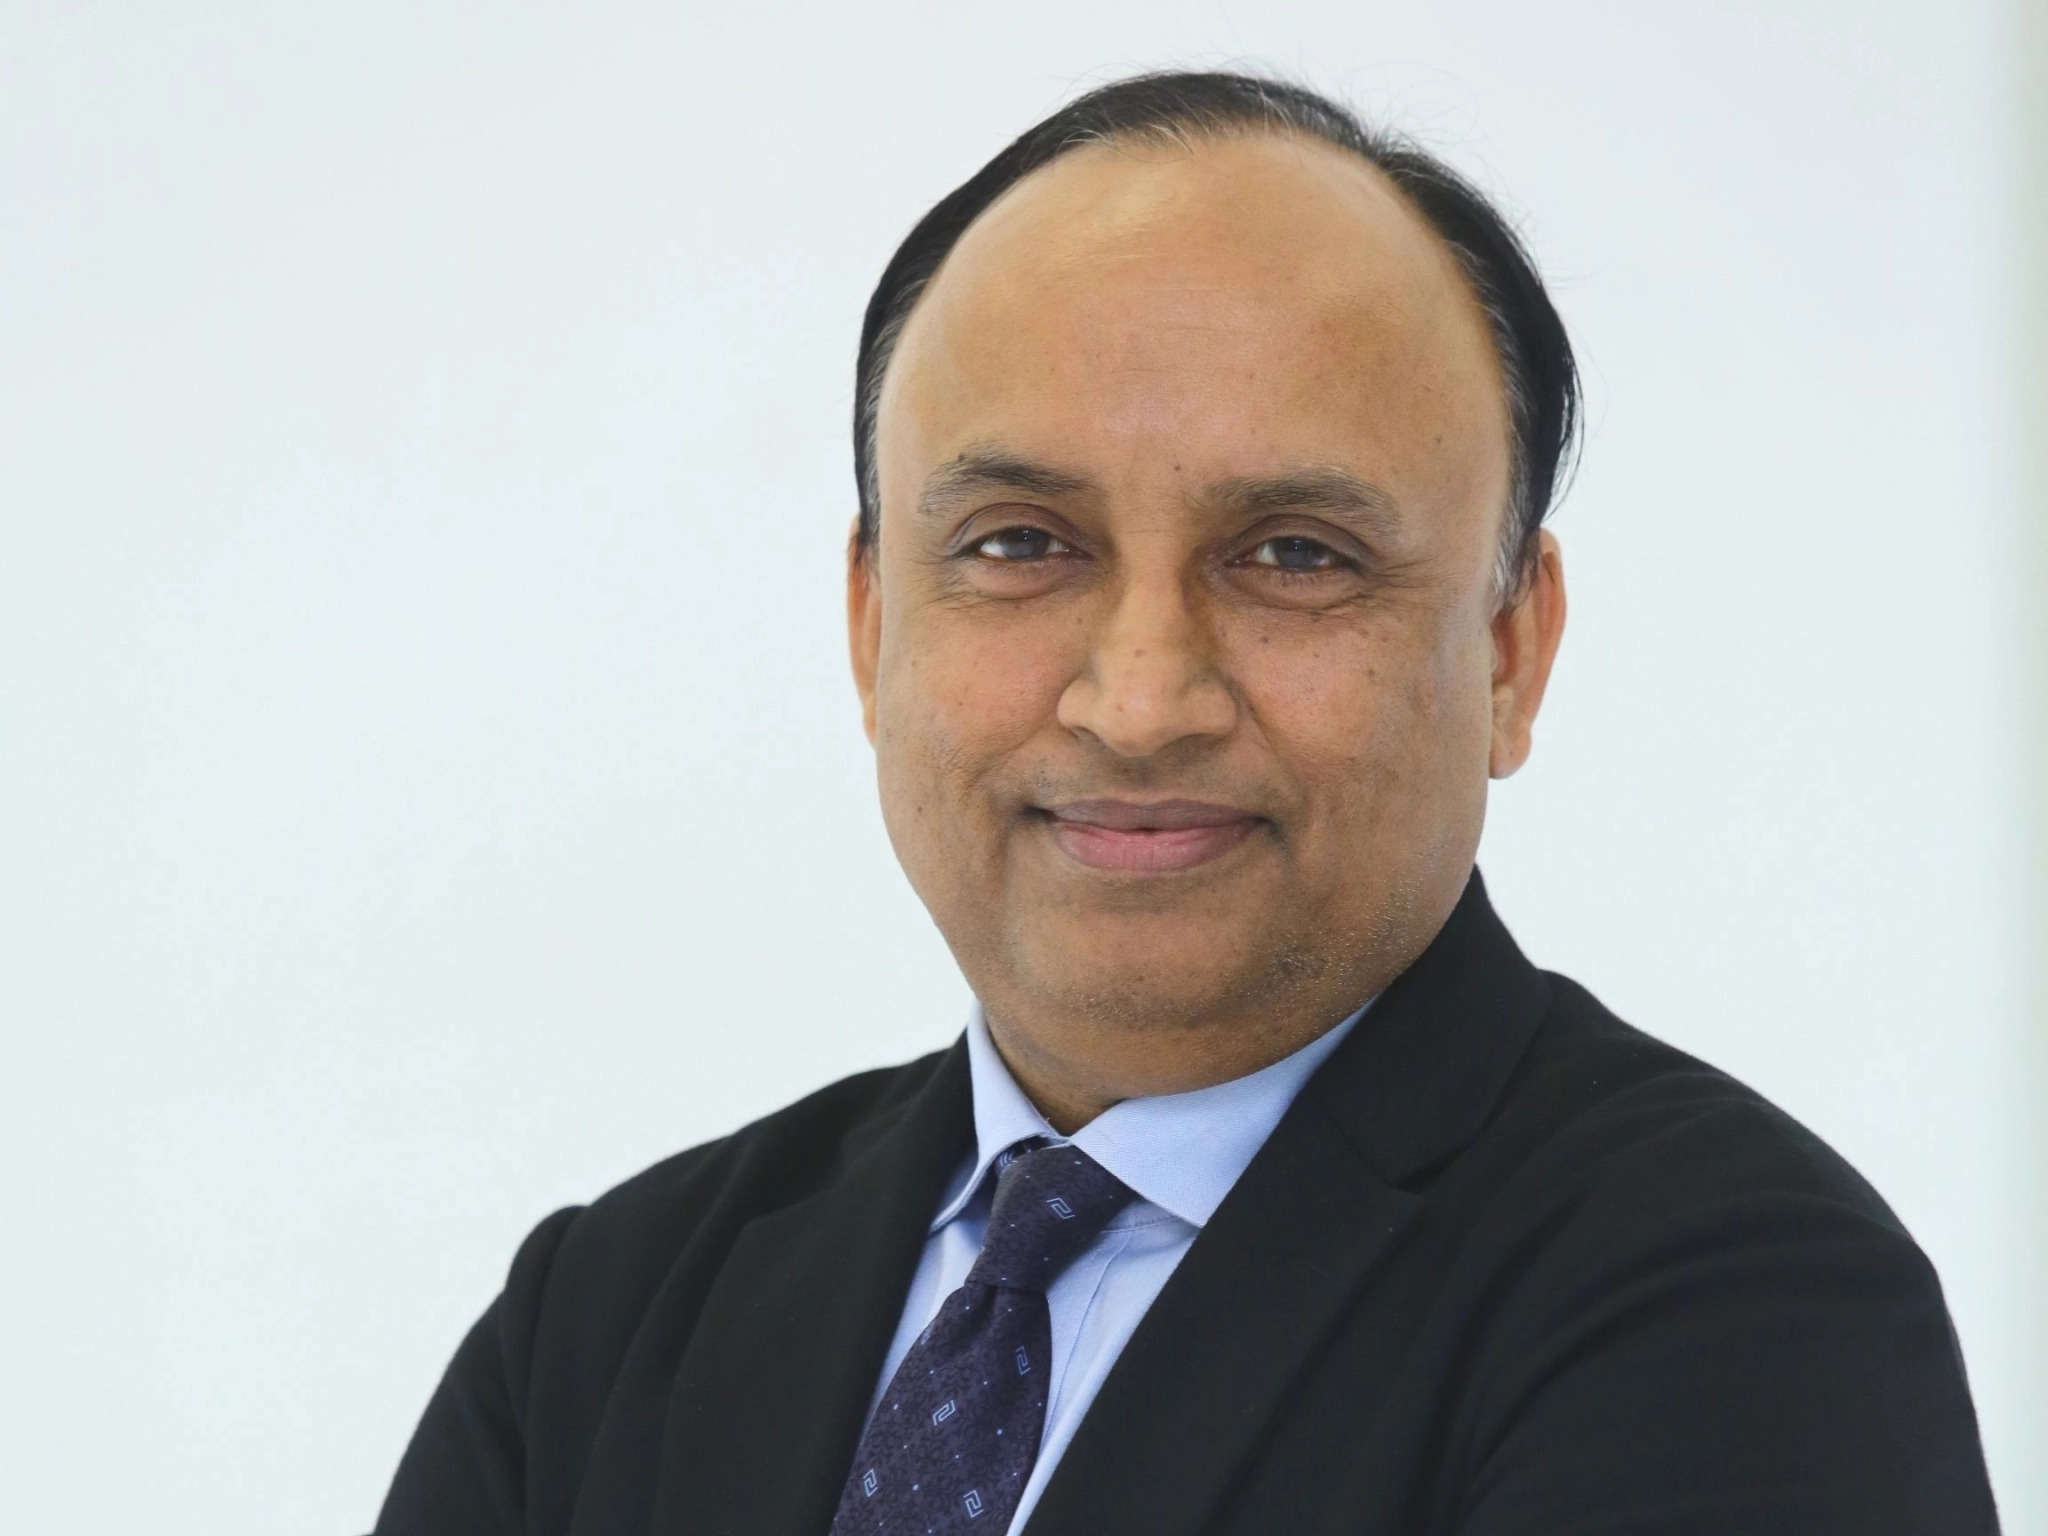 "We are monitoring the situation closely and will decide accordingly.  We are walking the fine line between the top line and the bottom line, ”says Shashank Srivastava, Senior Executive Director, Sales and Marketing at Maruti Suzuki India